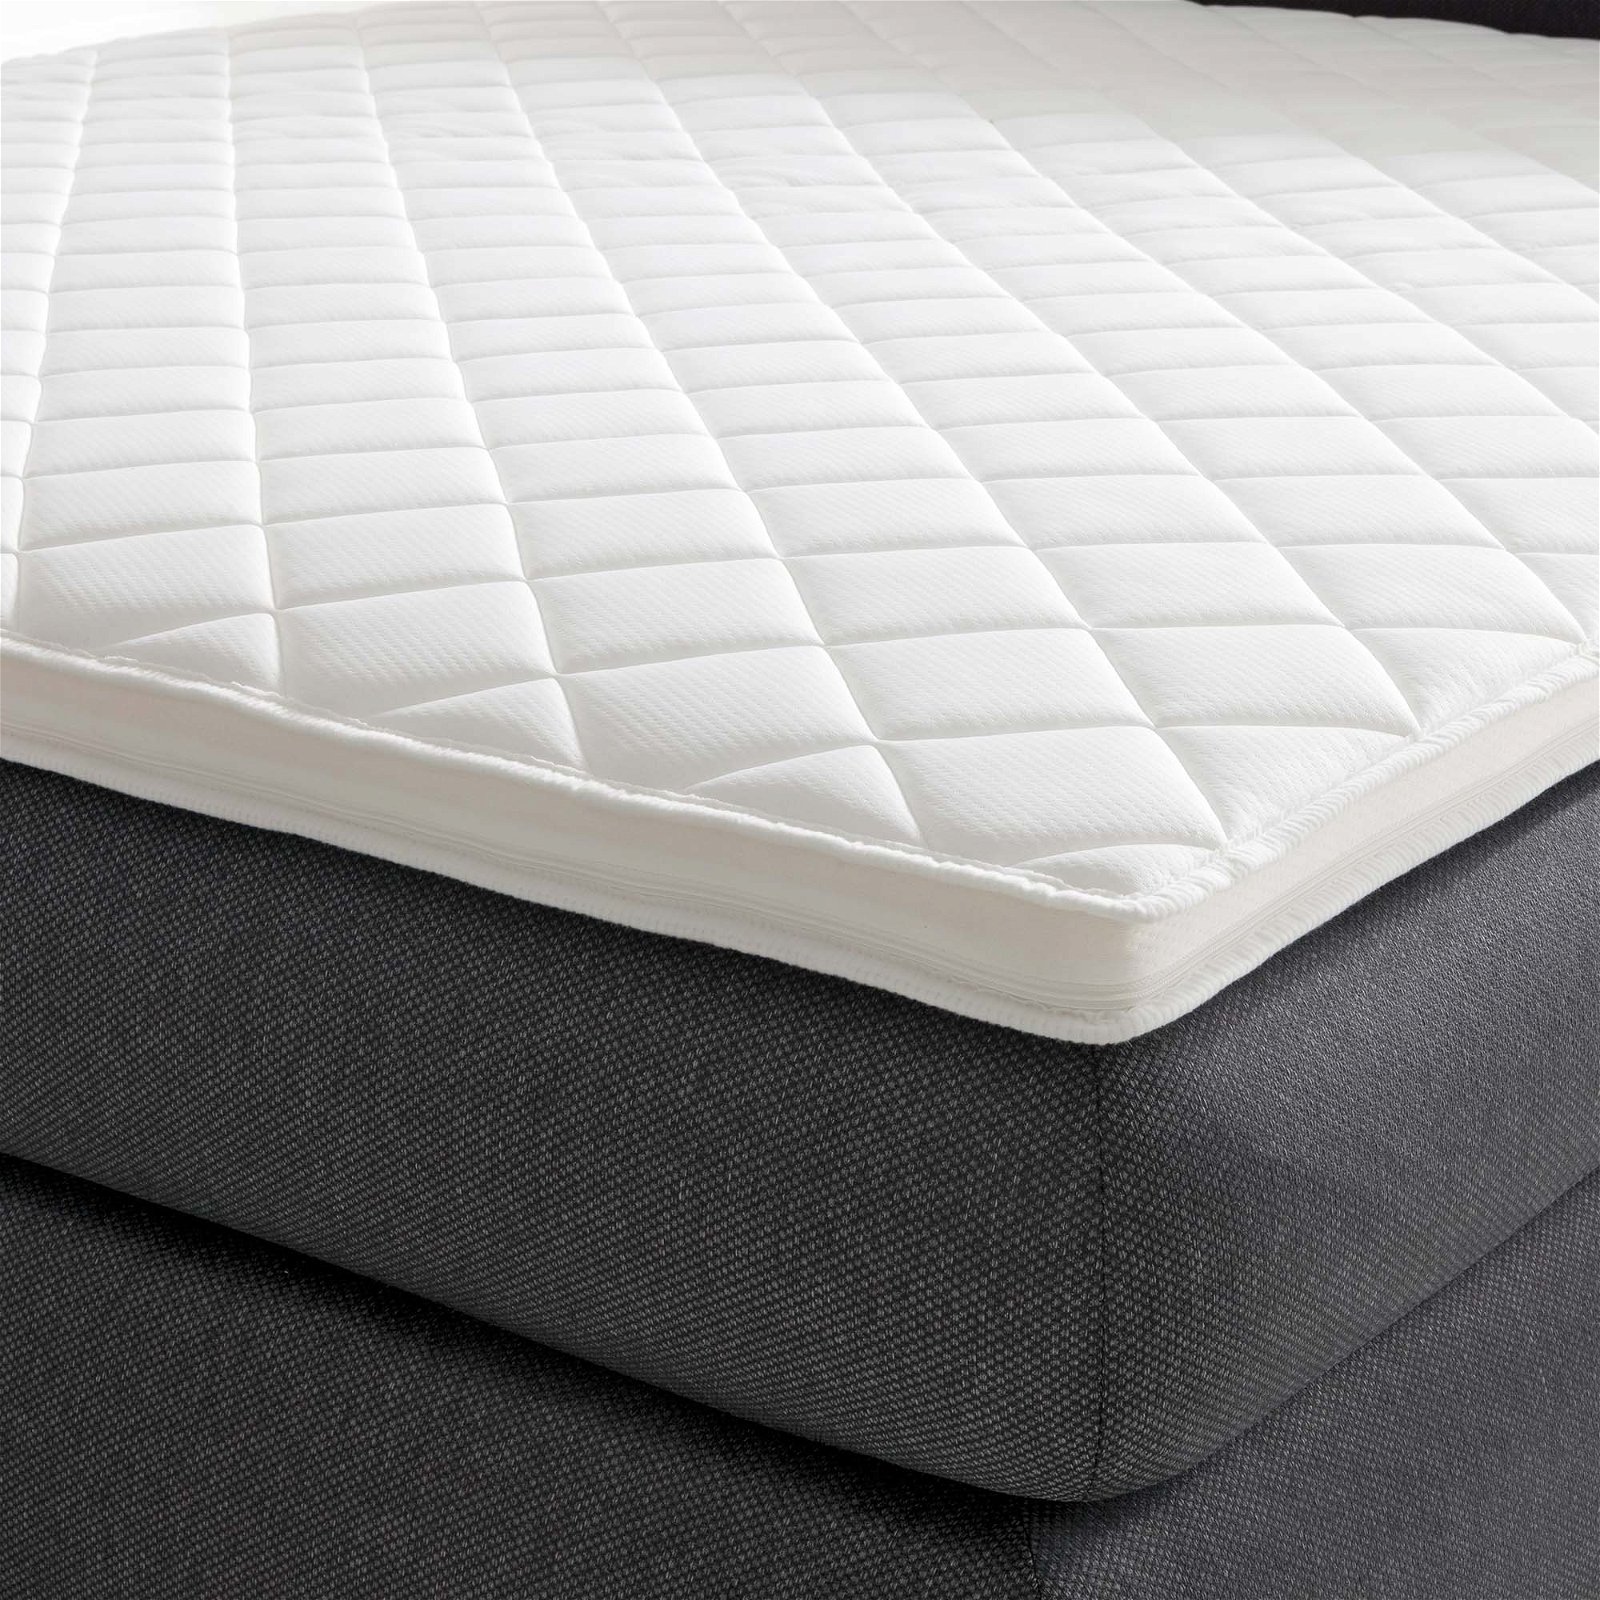 COMFORT PUR Topper 120x200 - H2